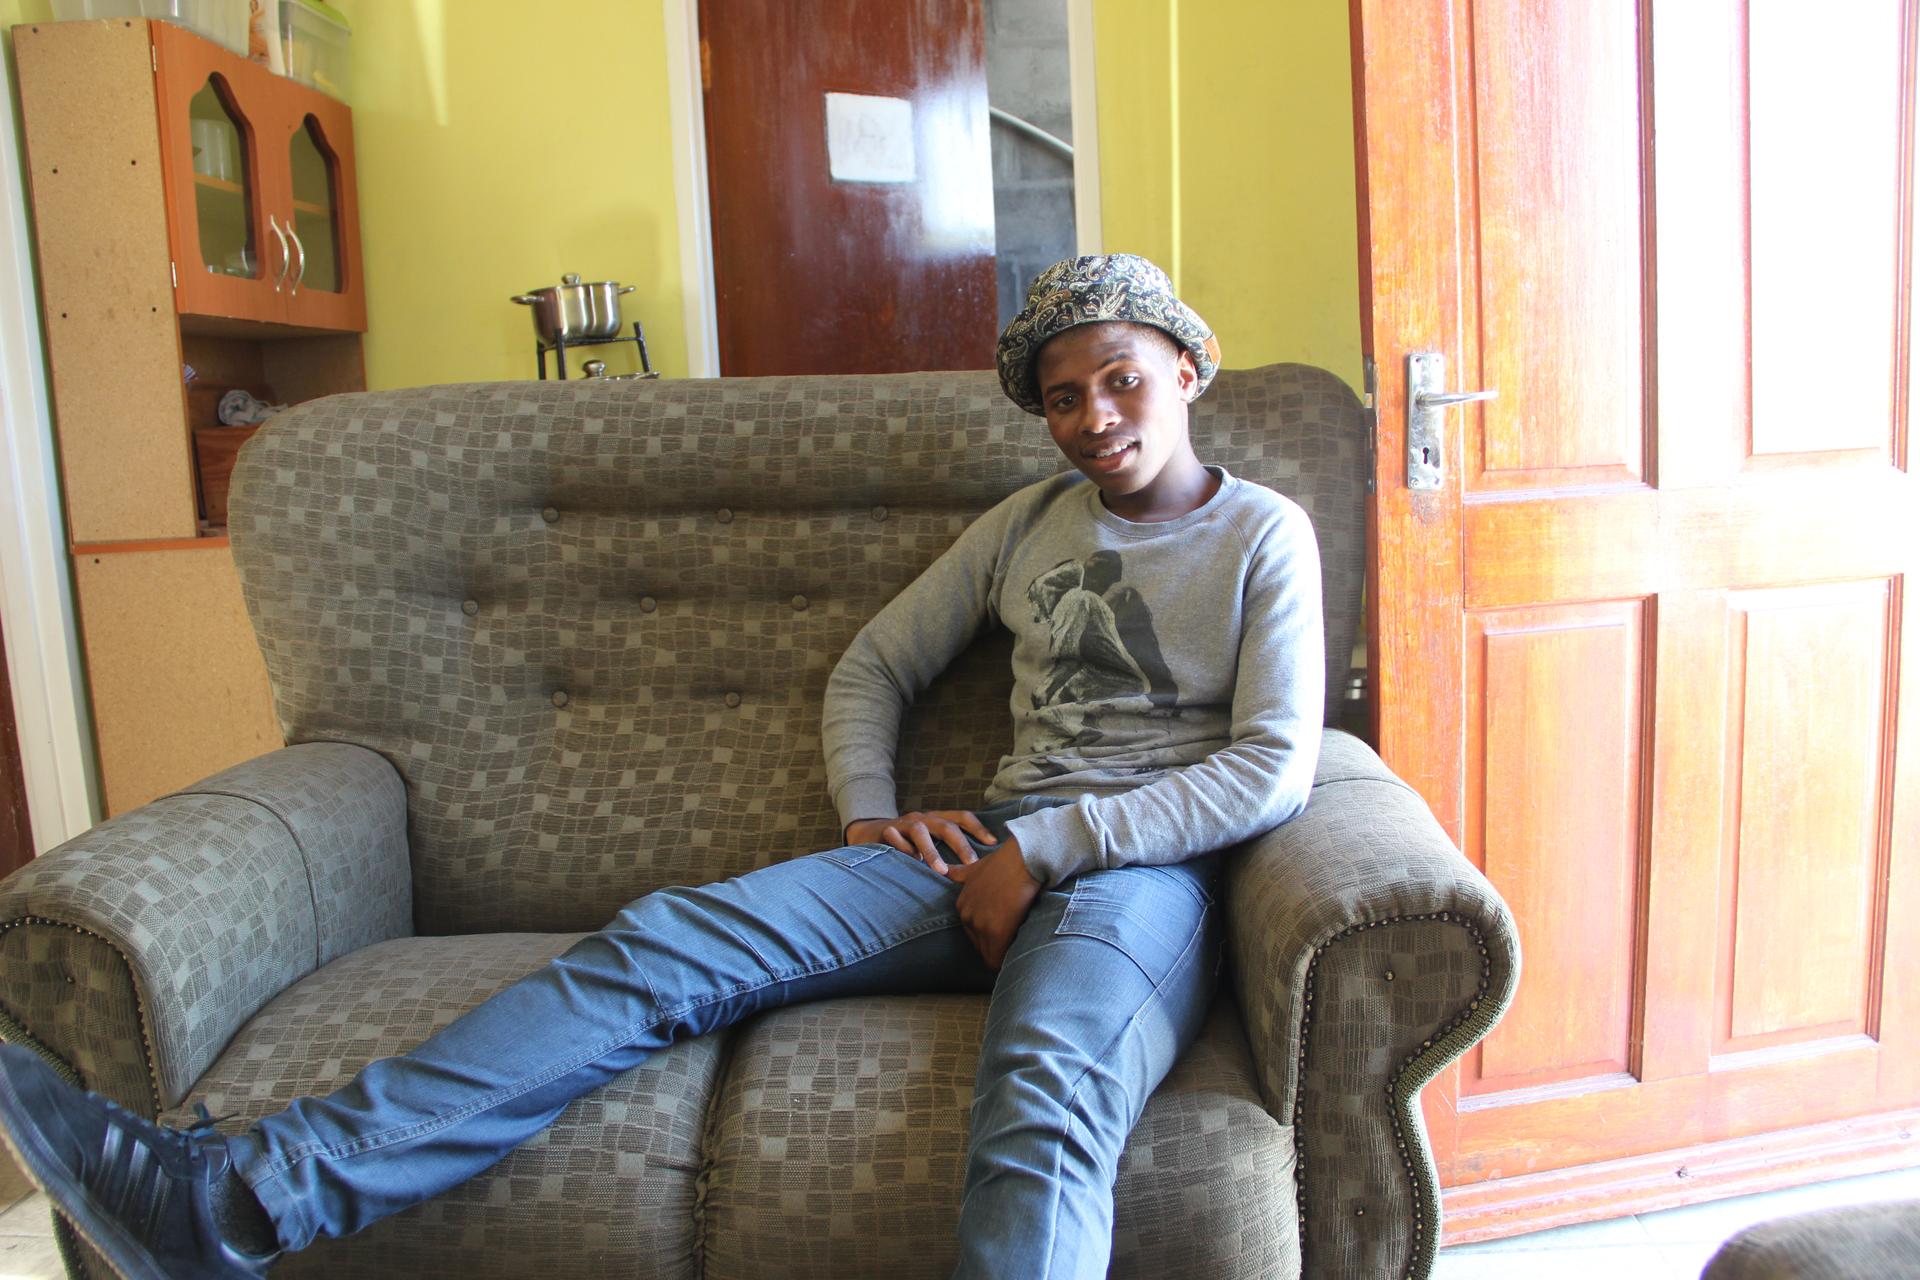 Sive (SEE-vay), a South African high school student, enjoys his new couch.